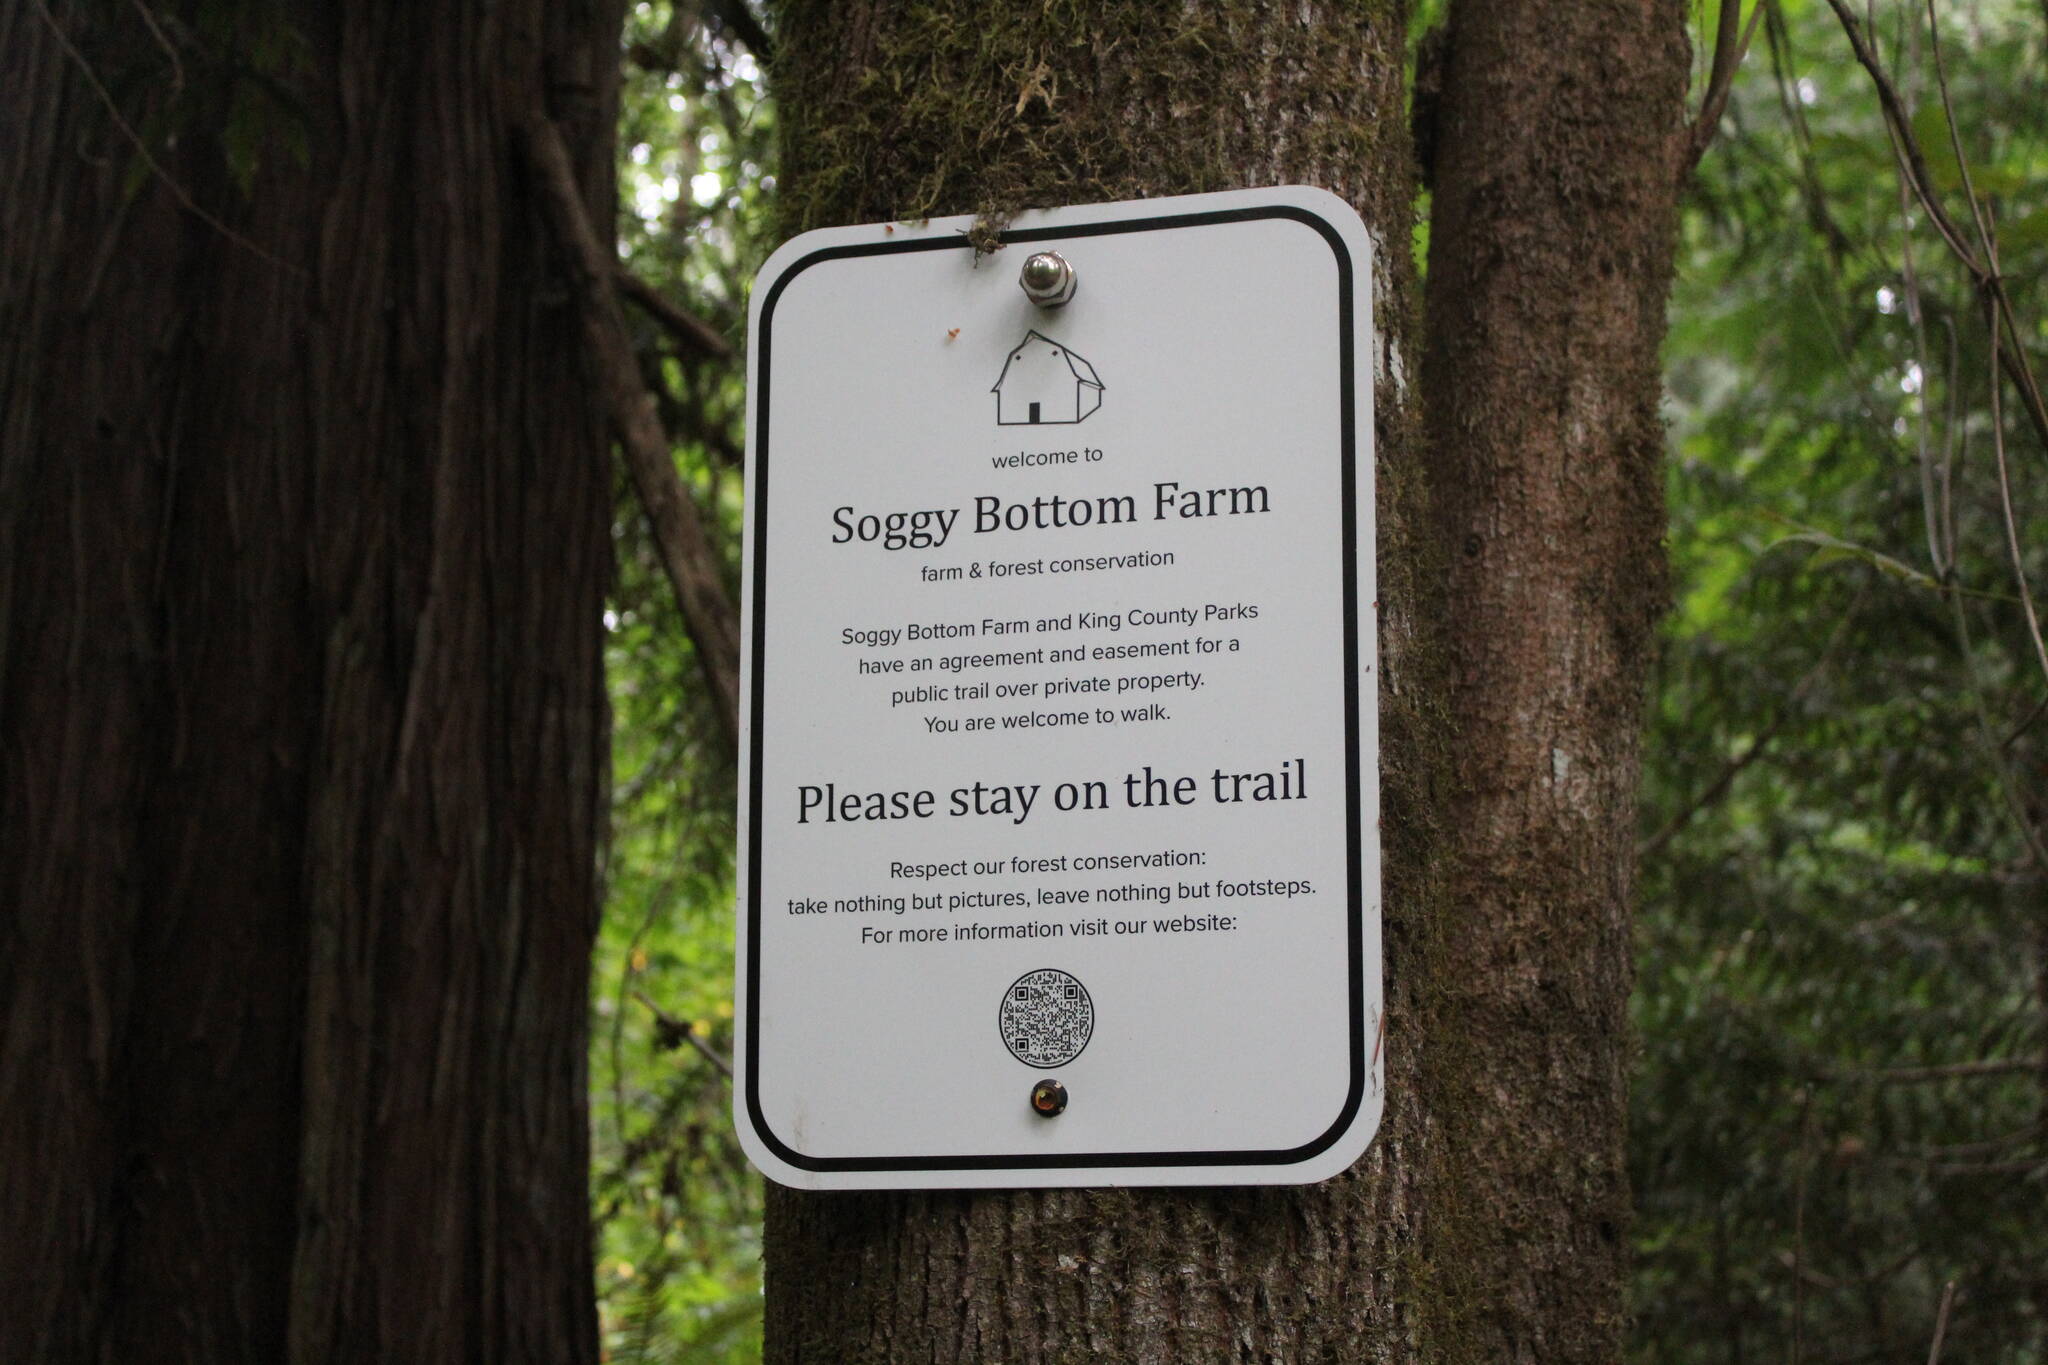 A sign along the trail on Soggy Bottom Farm explaining the agreement and easement between the farm and King County Parks, with a QR code to the farm’s website. Photo by Bailey Jo Josie/Sound Publishing.